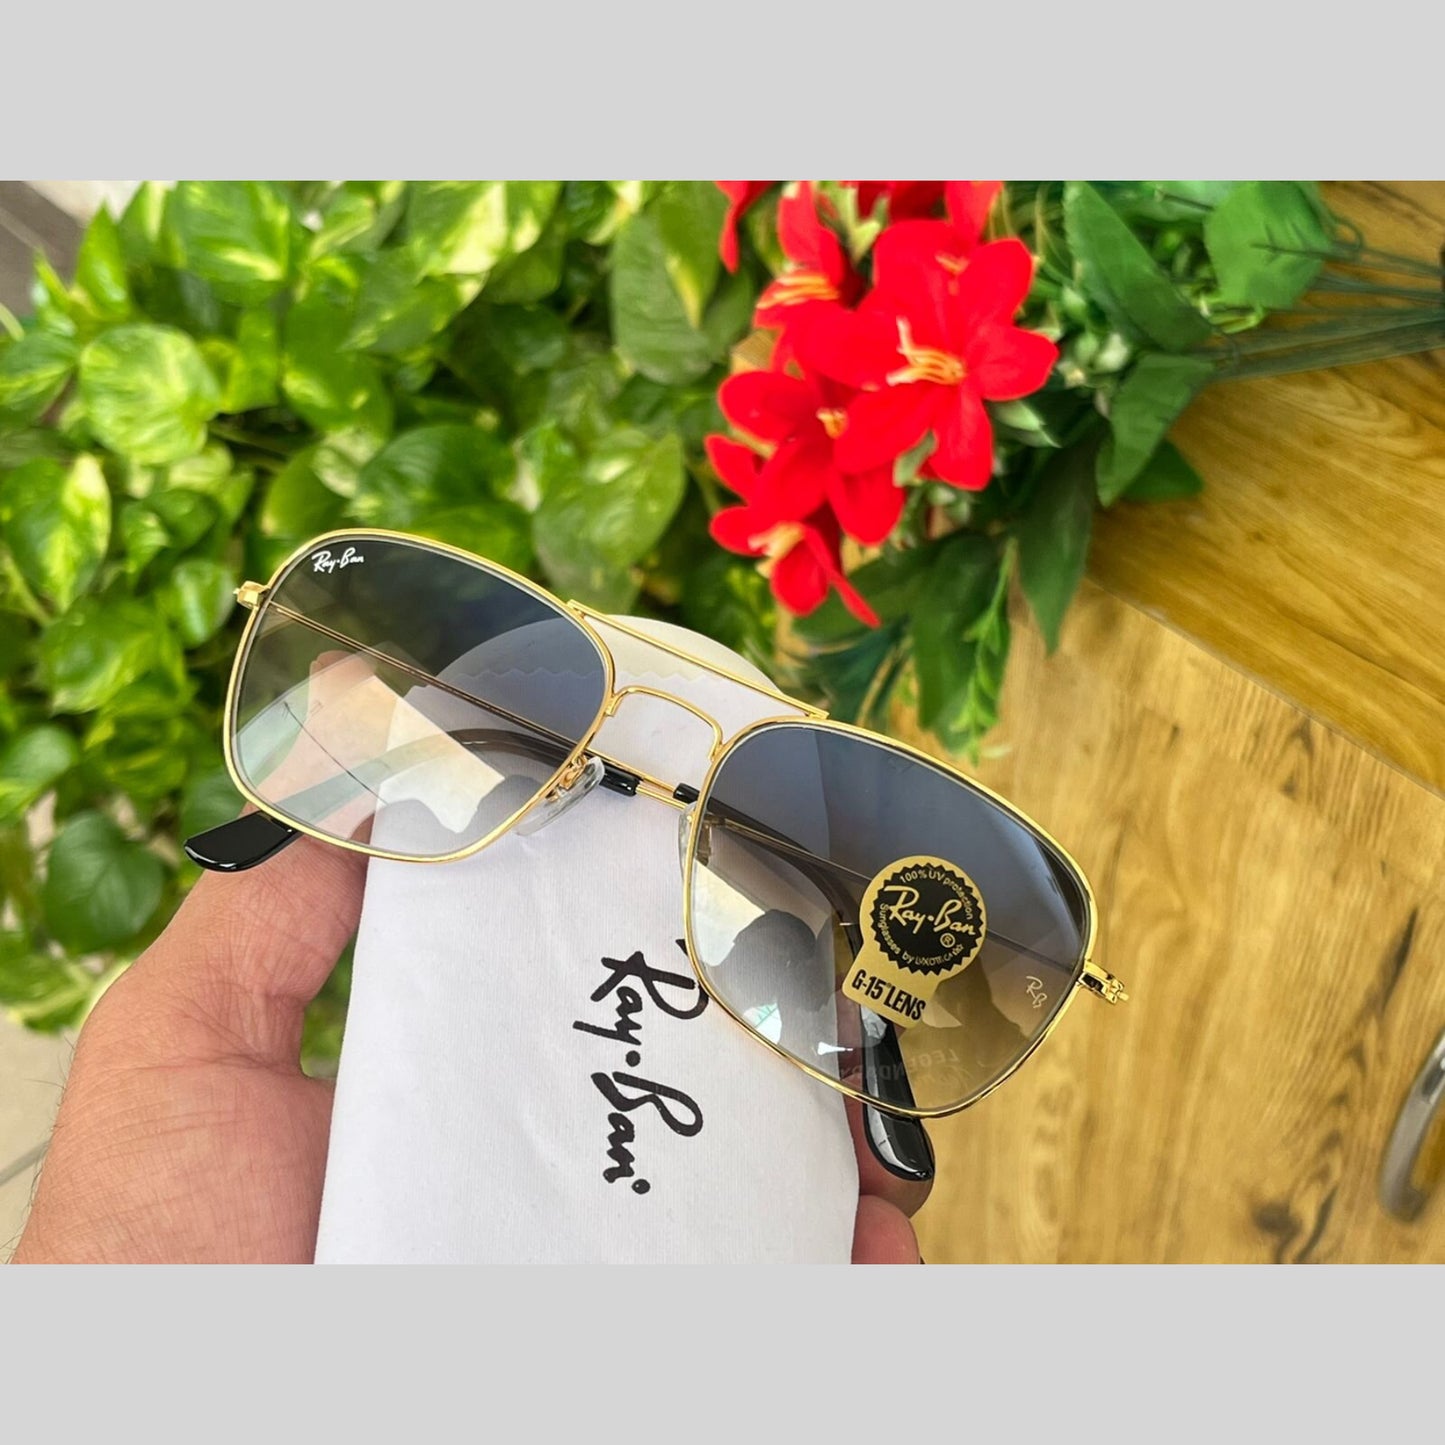 New Attractive Blue Shaded & Gold 3136 Square Aviator Style Sunglass For Unisex